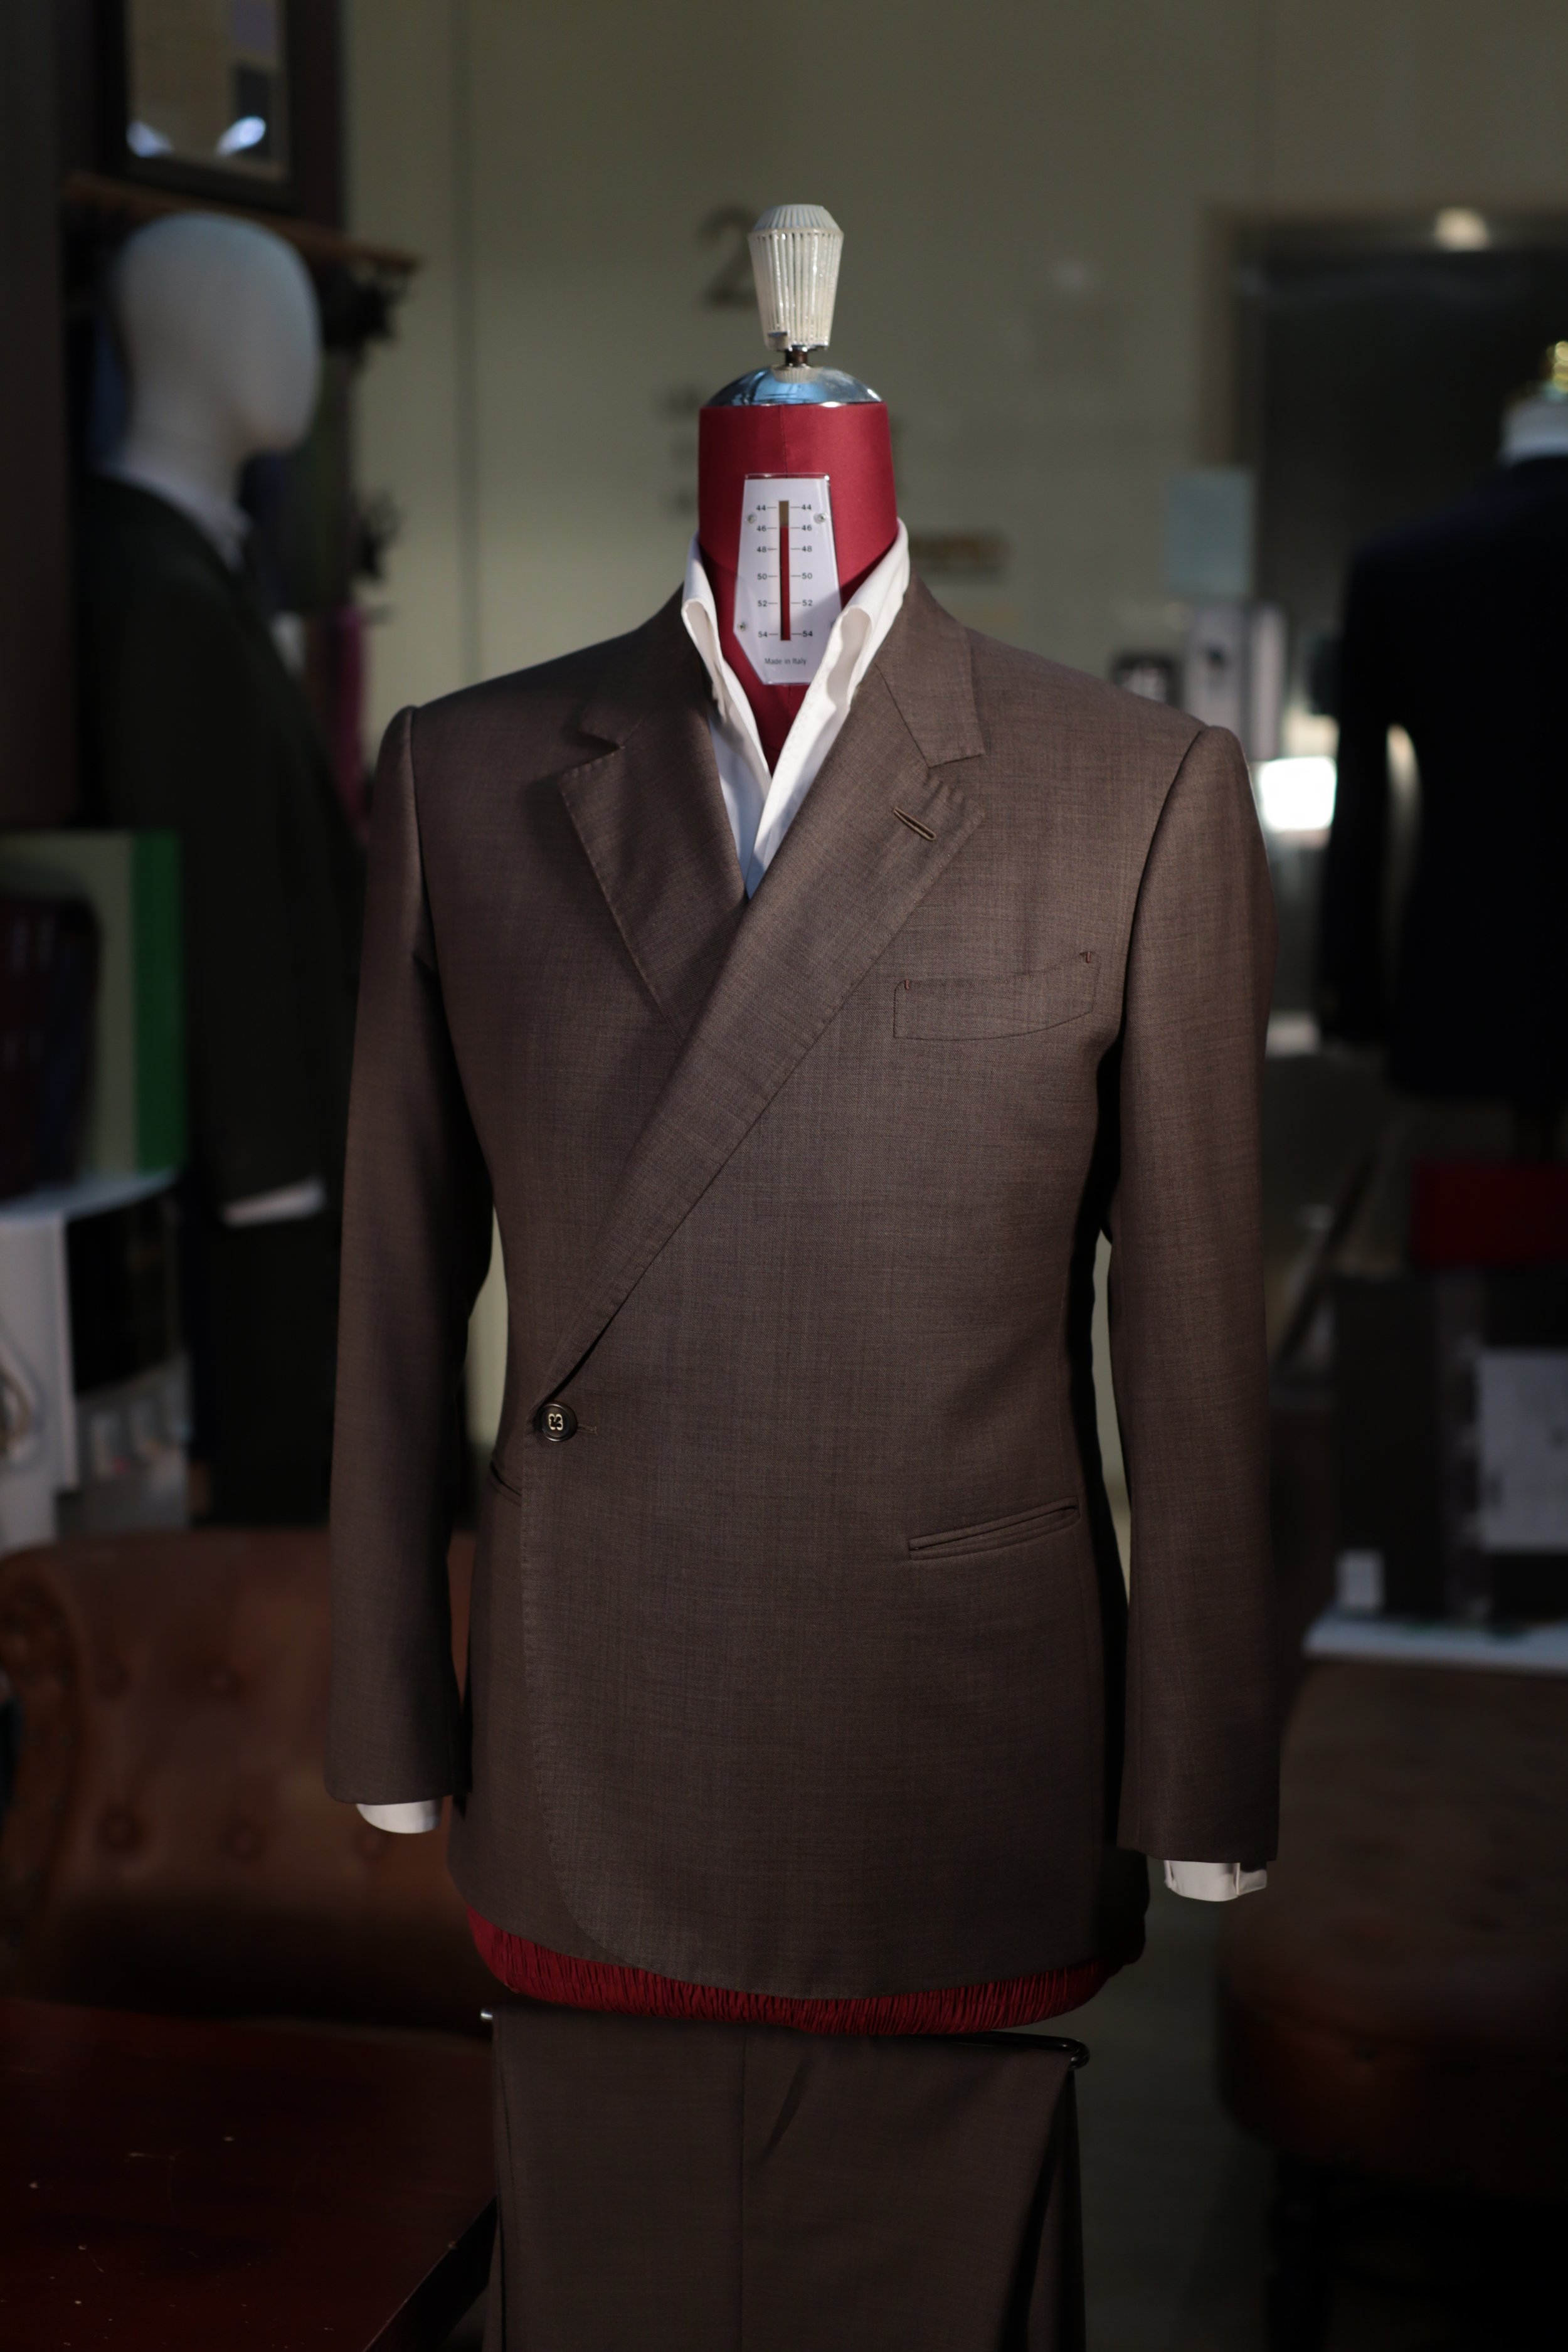 Oblique Style Suit Double Breasted STANDEVEN PARKLANE S120s Made Suits Tailor Made Bespoke Suits Made in Japan Zoom.JPG